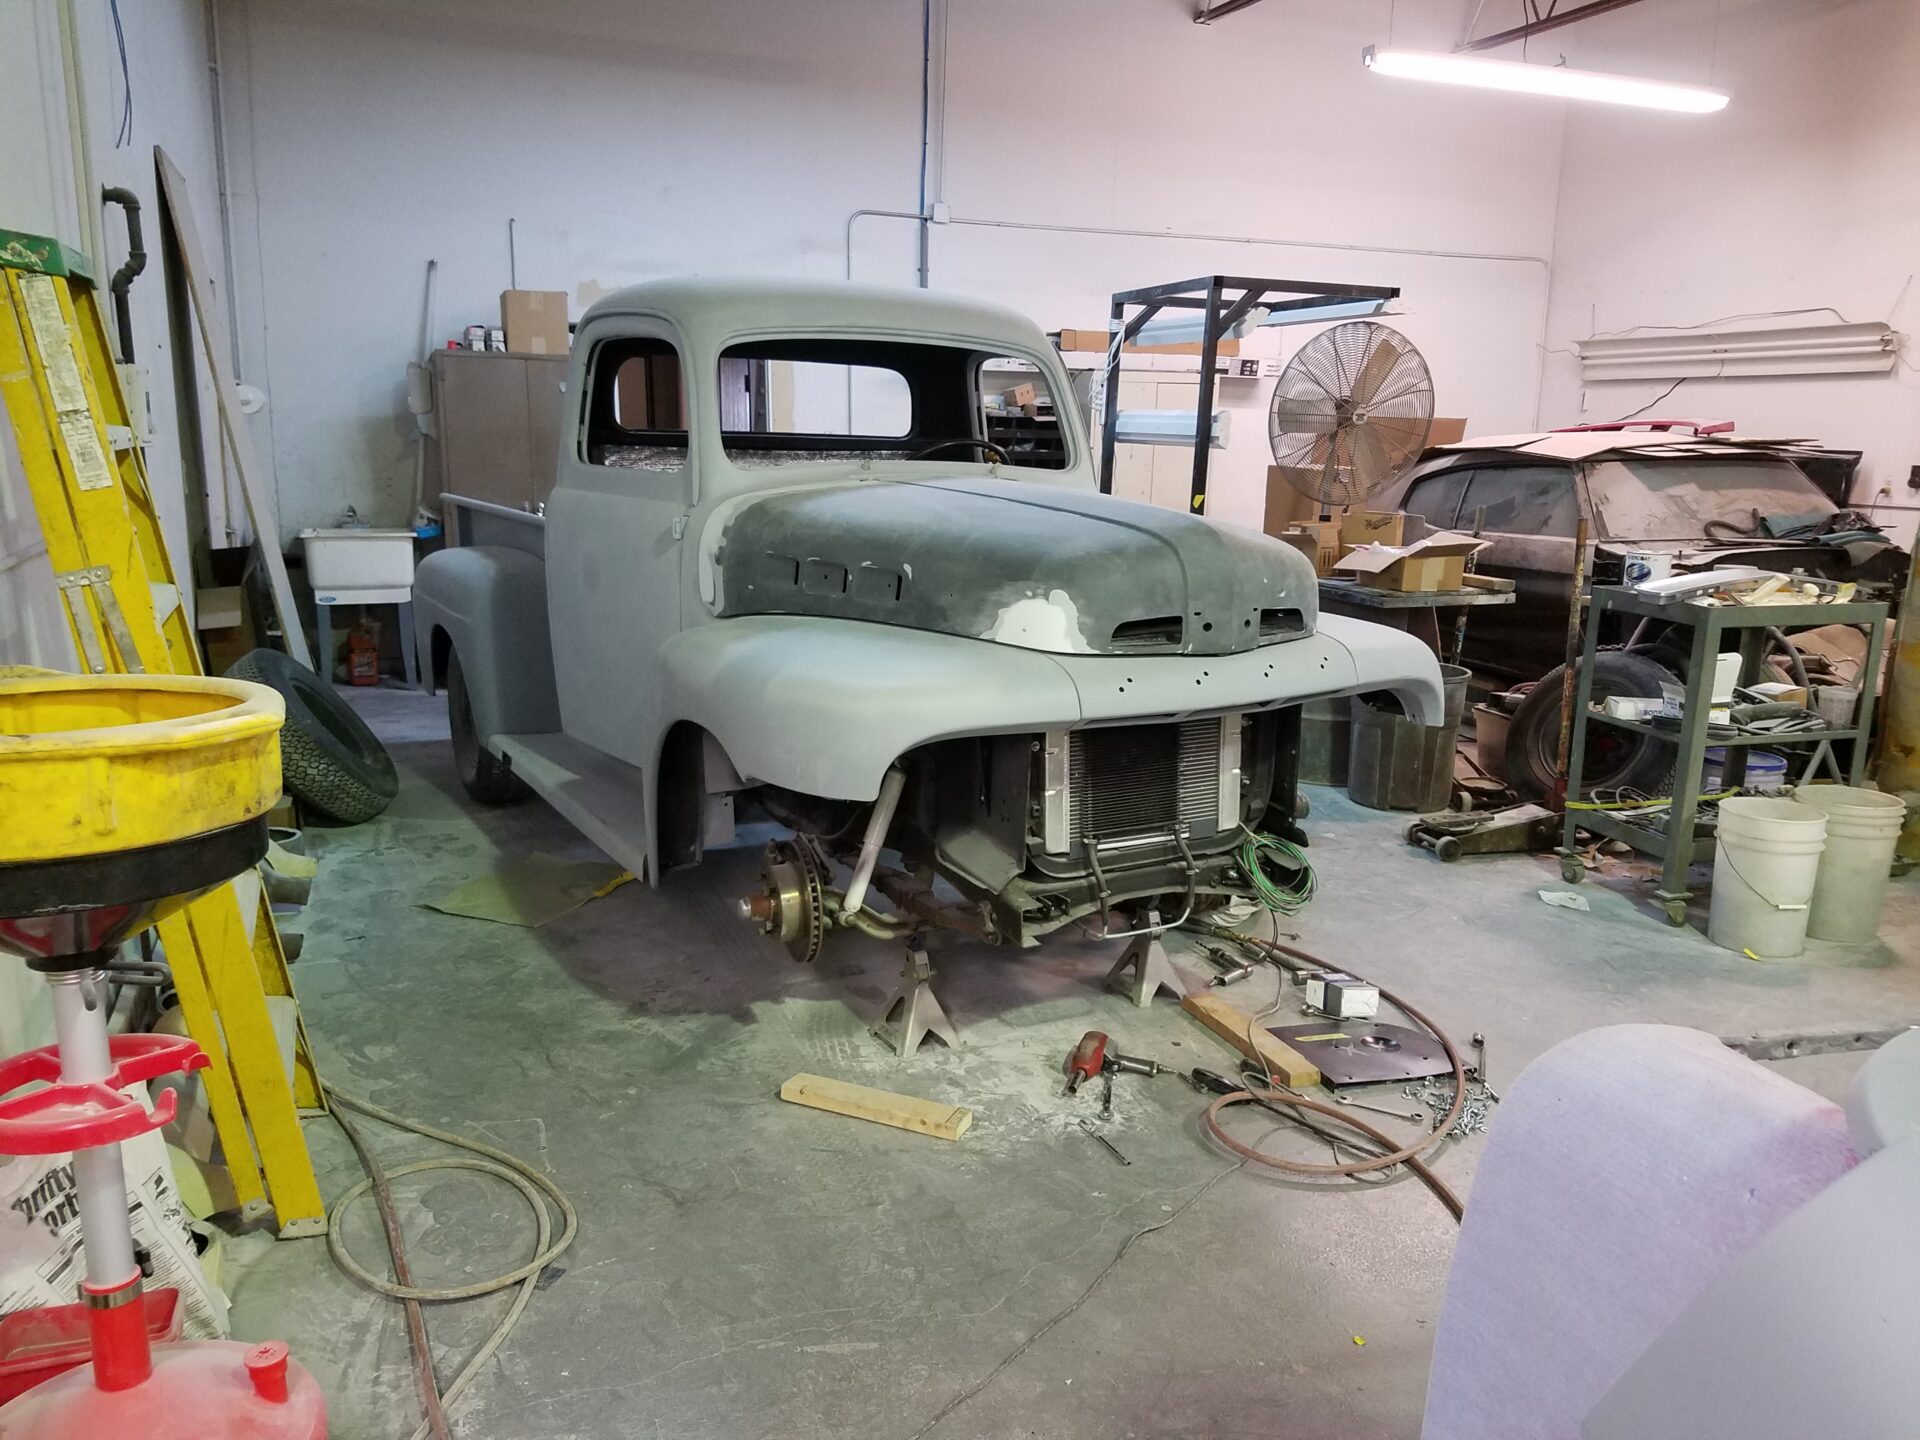 A partially disassembled 1952 Ford F100 model